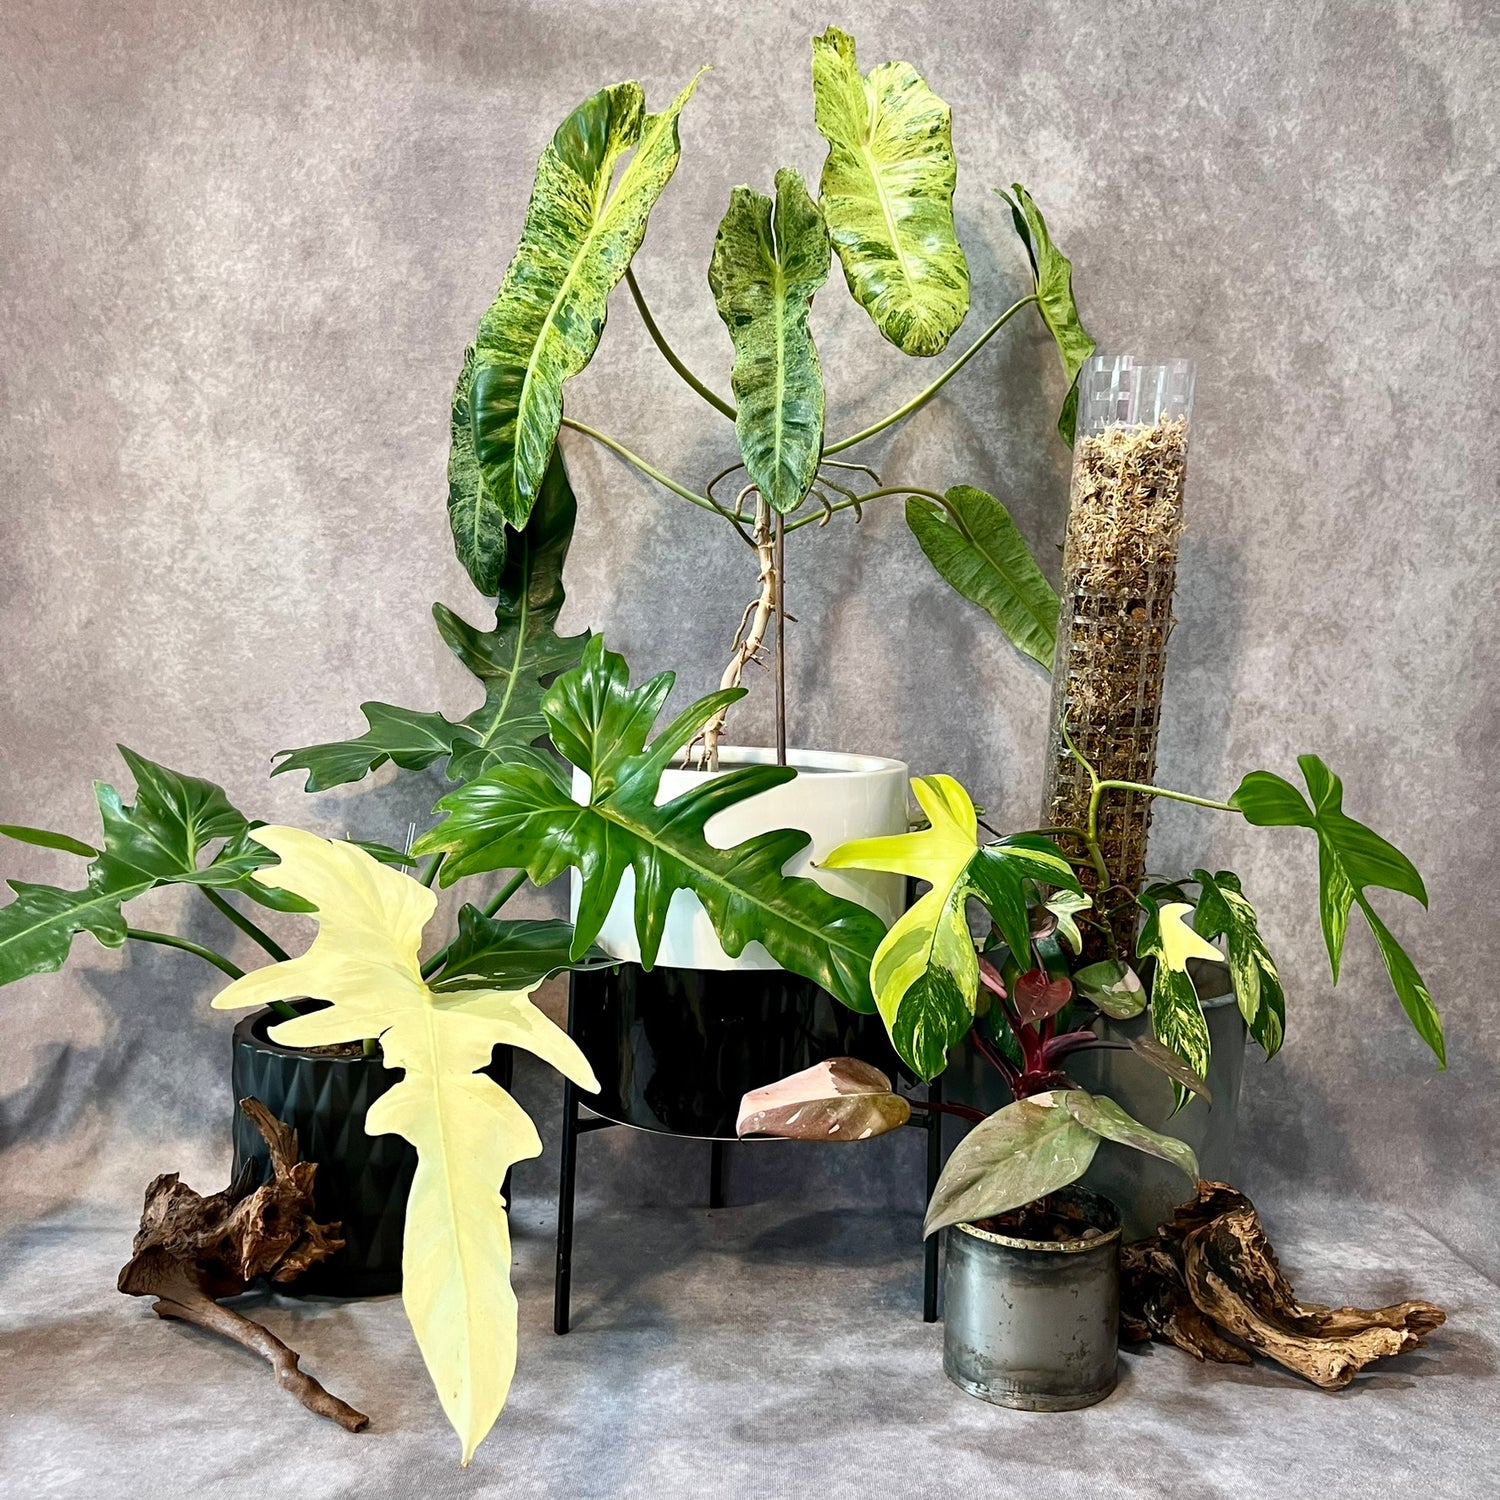 Philodendrons like this lynamii, come in a shape and size suitable for any collection